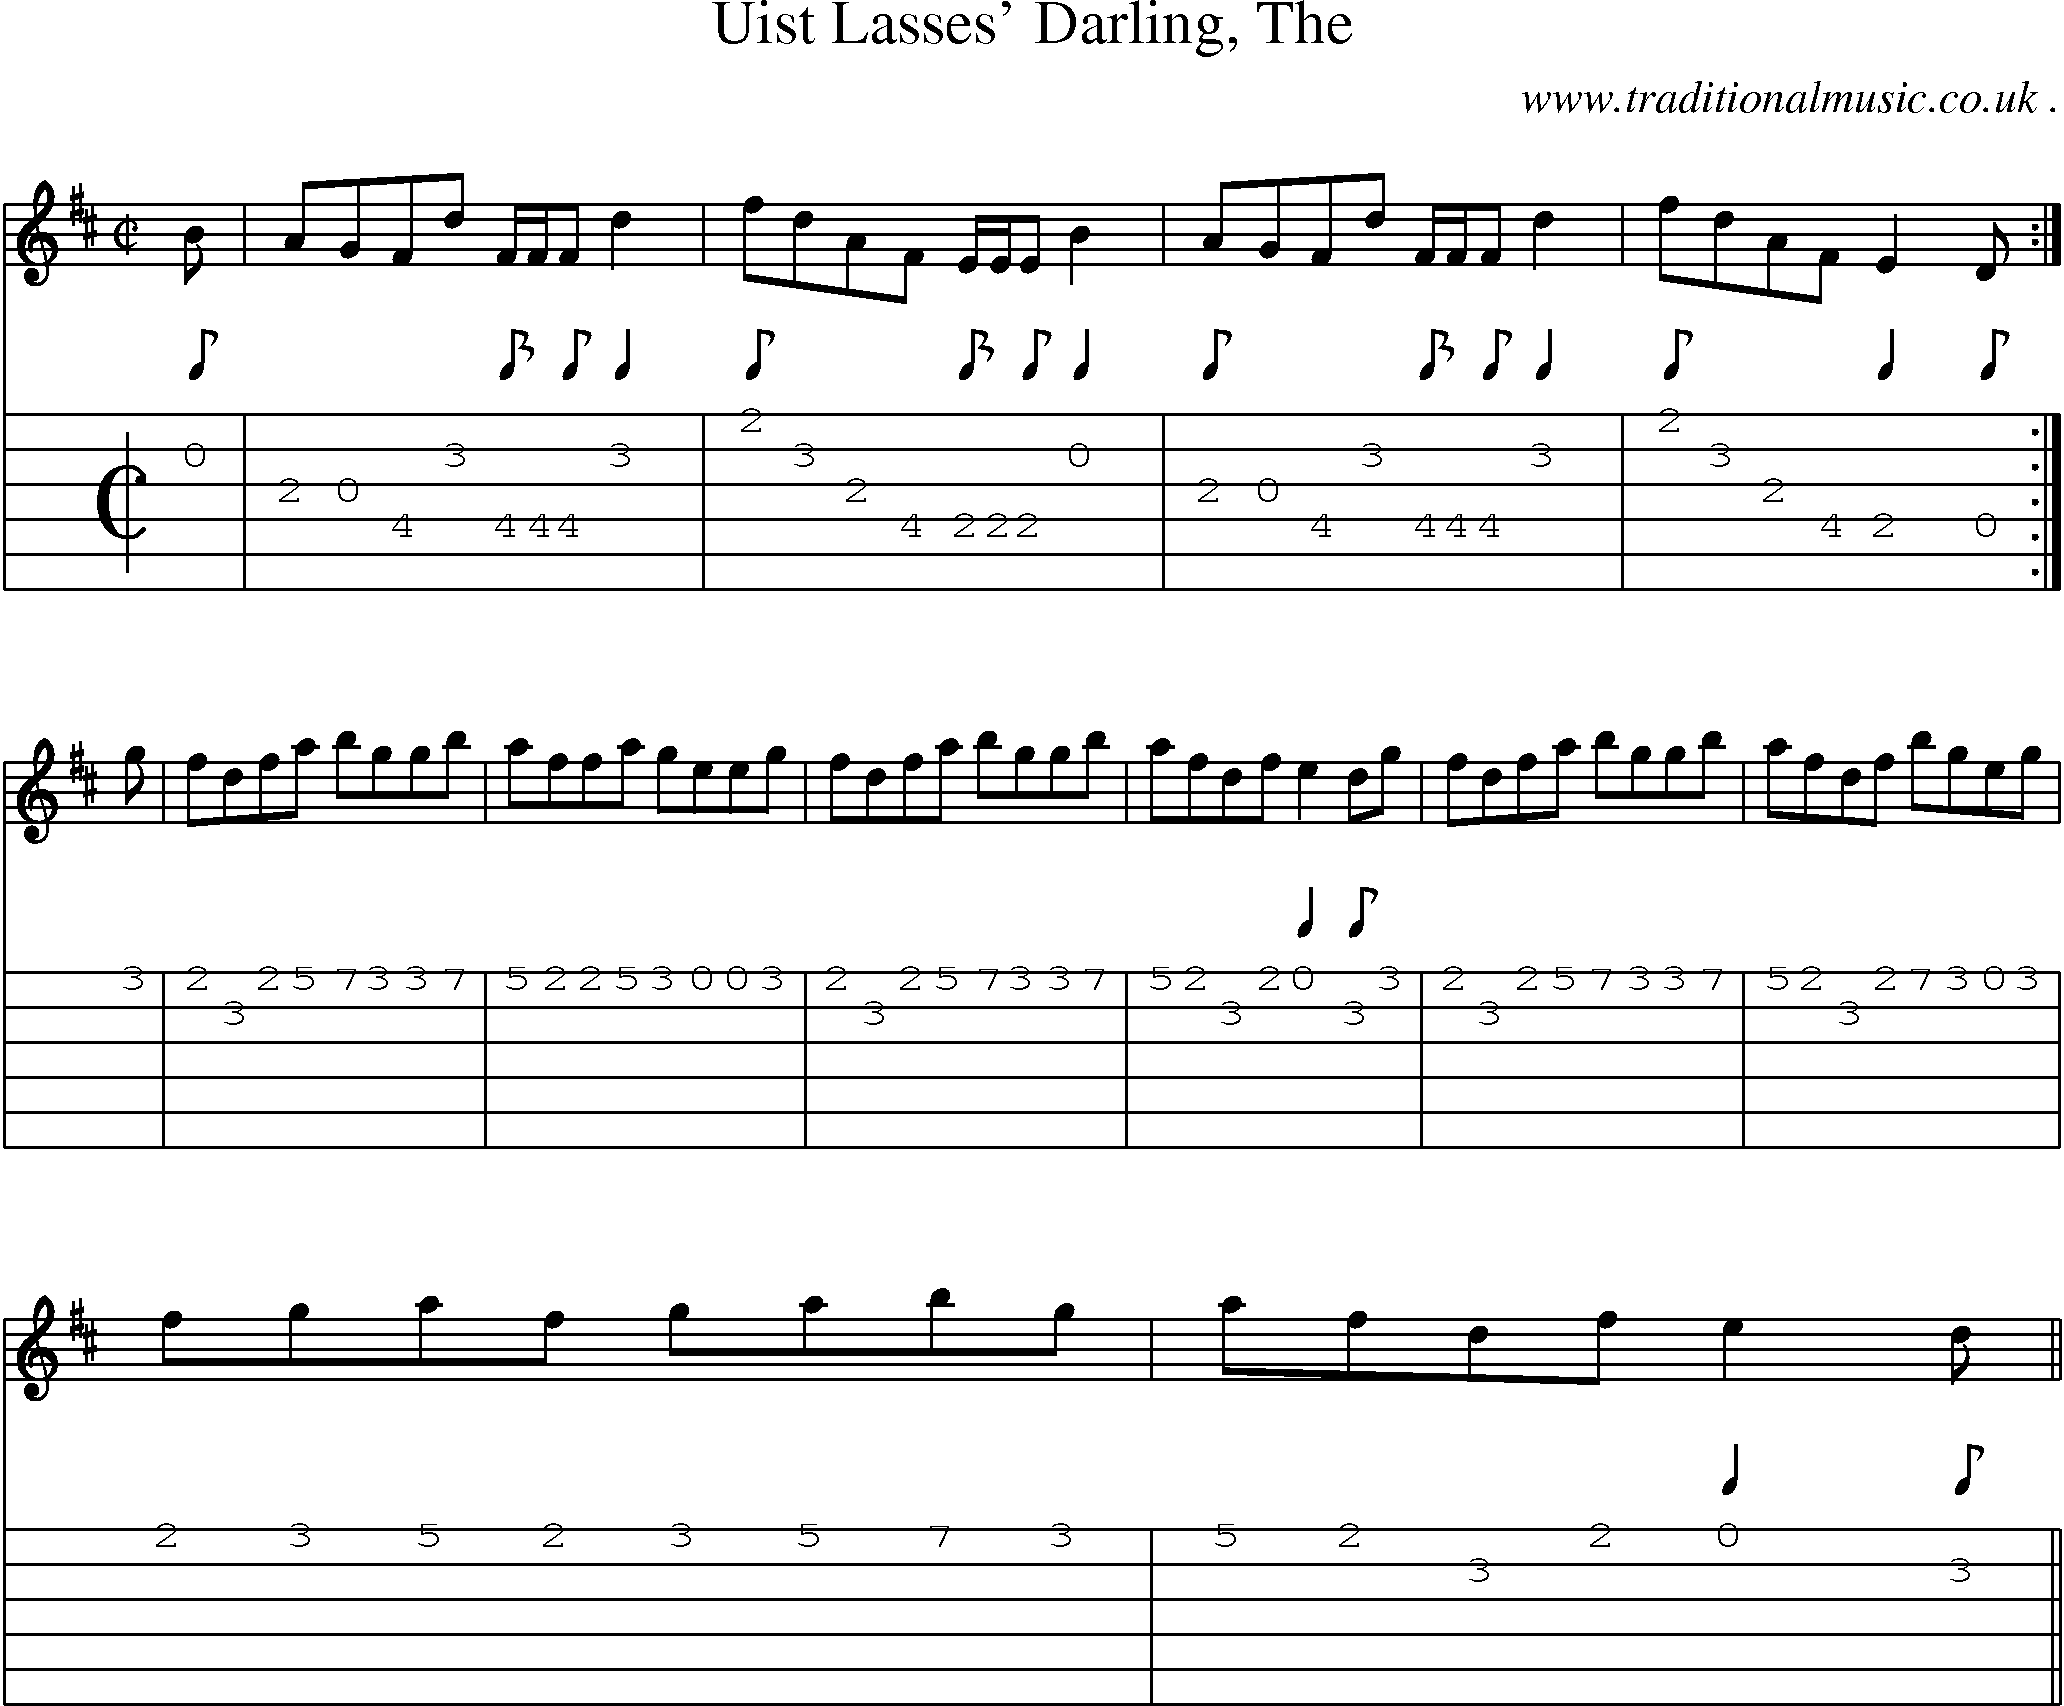 Sheet-music  score, Chords and Guitar Tabs for Uist Lasses Darling The